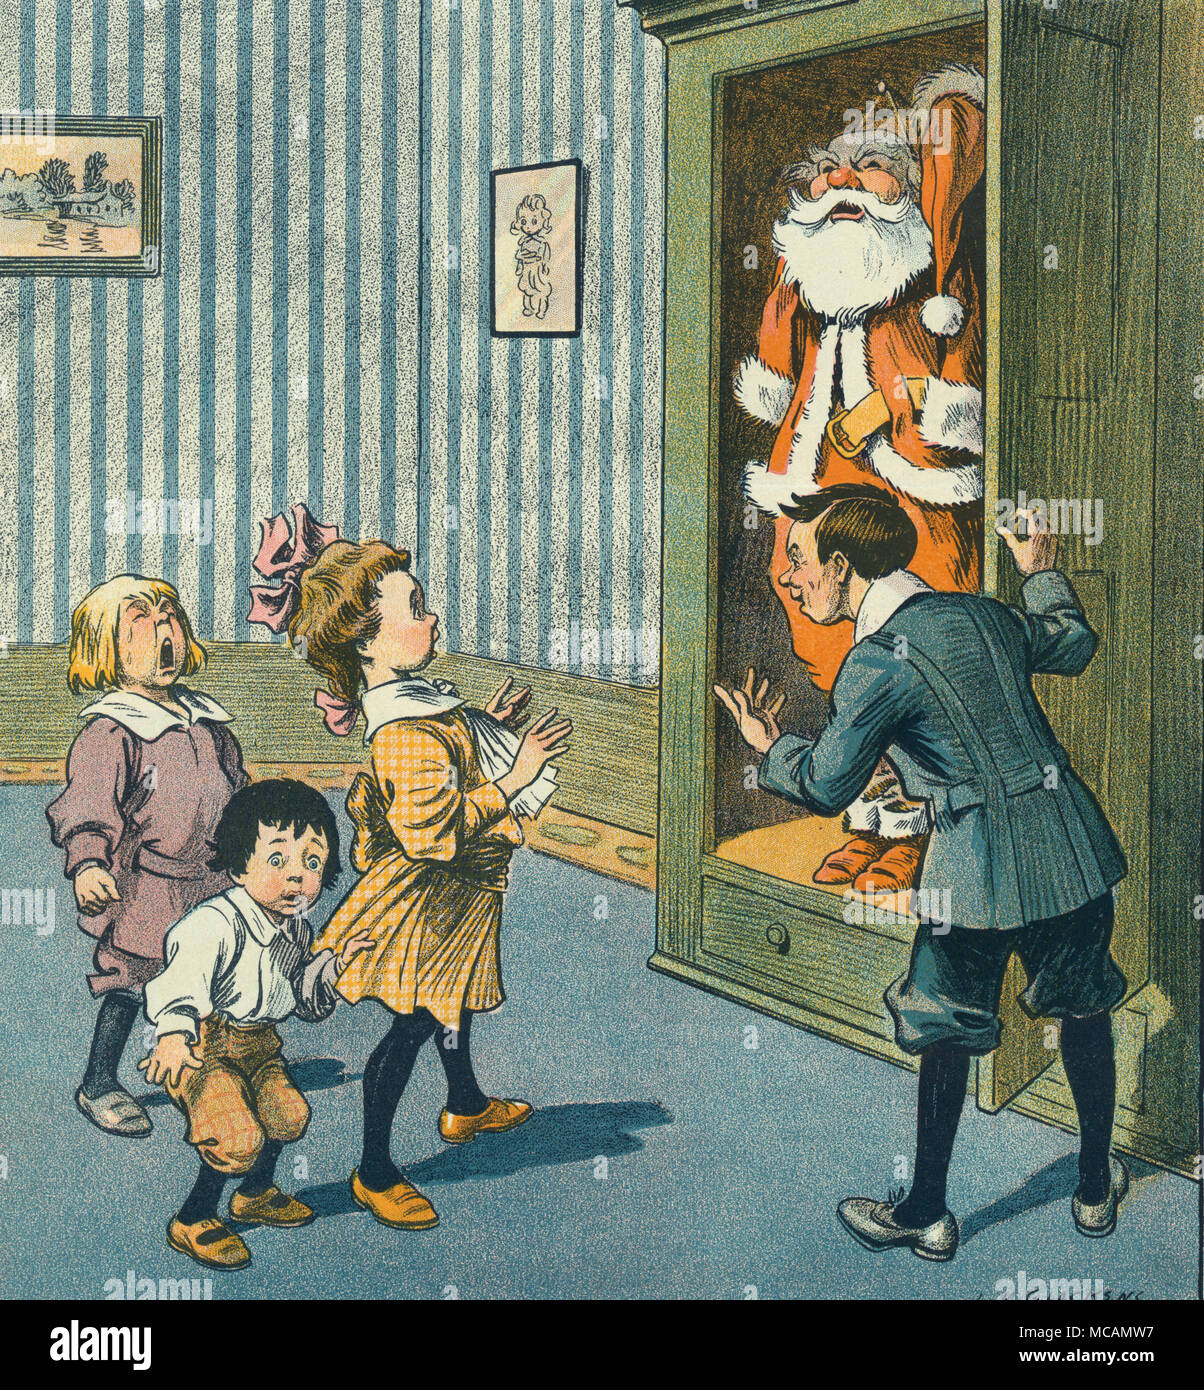 Children cry when they discover Santa has been locked in a cabinet.  Done by illustrator Louis M. Glackens (1866?1933).  He was American illustrator, animator and cartoonist, and the brother of Ashcan School painter and illustrator William Glackens.  Louis M. Glackens was born in Philadelphia, Pennsylvania. In the 1890s he began to work for Puck, a magazine known for its political and social satire, where his humorous depictions of different ethnic groups reflected the melting pot of New York City at that time. Stock Photo